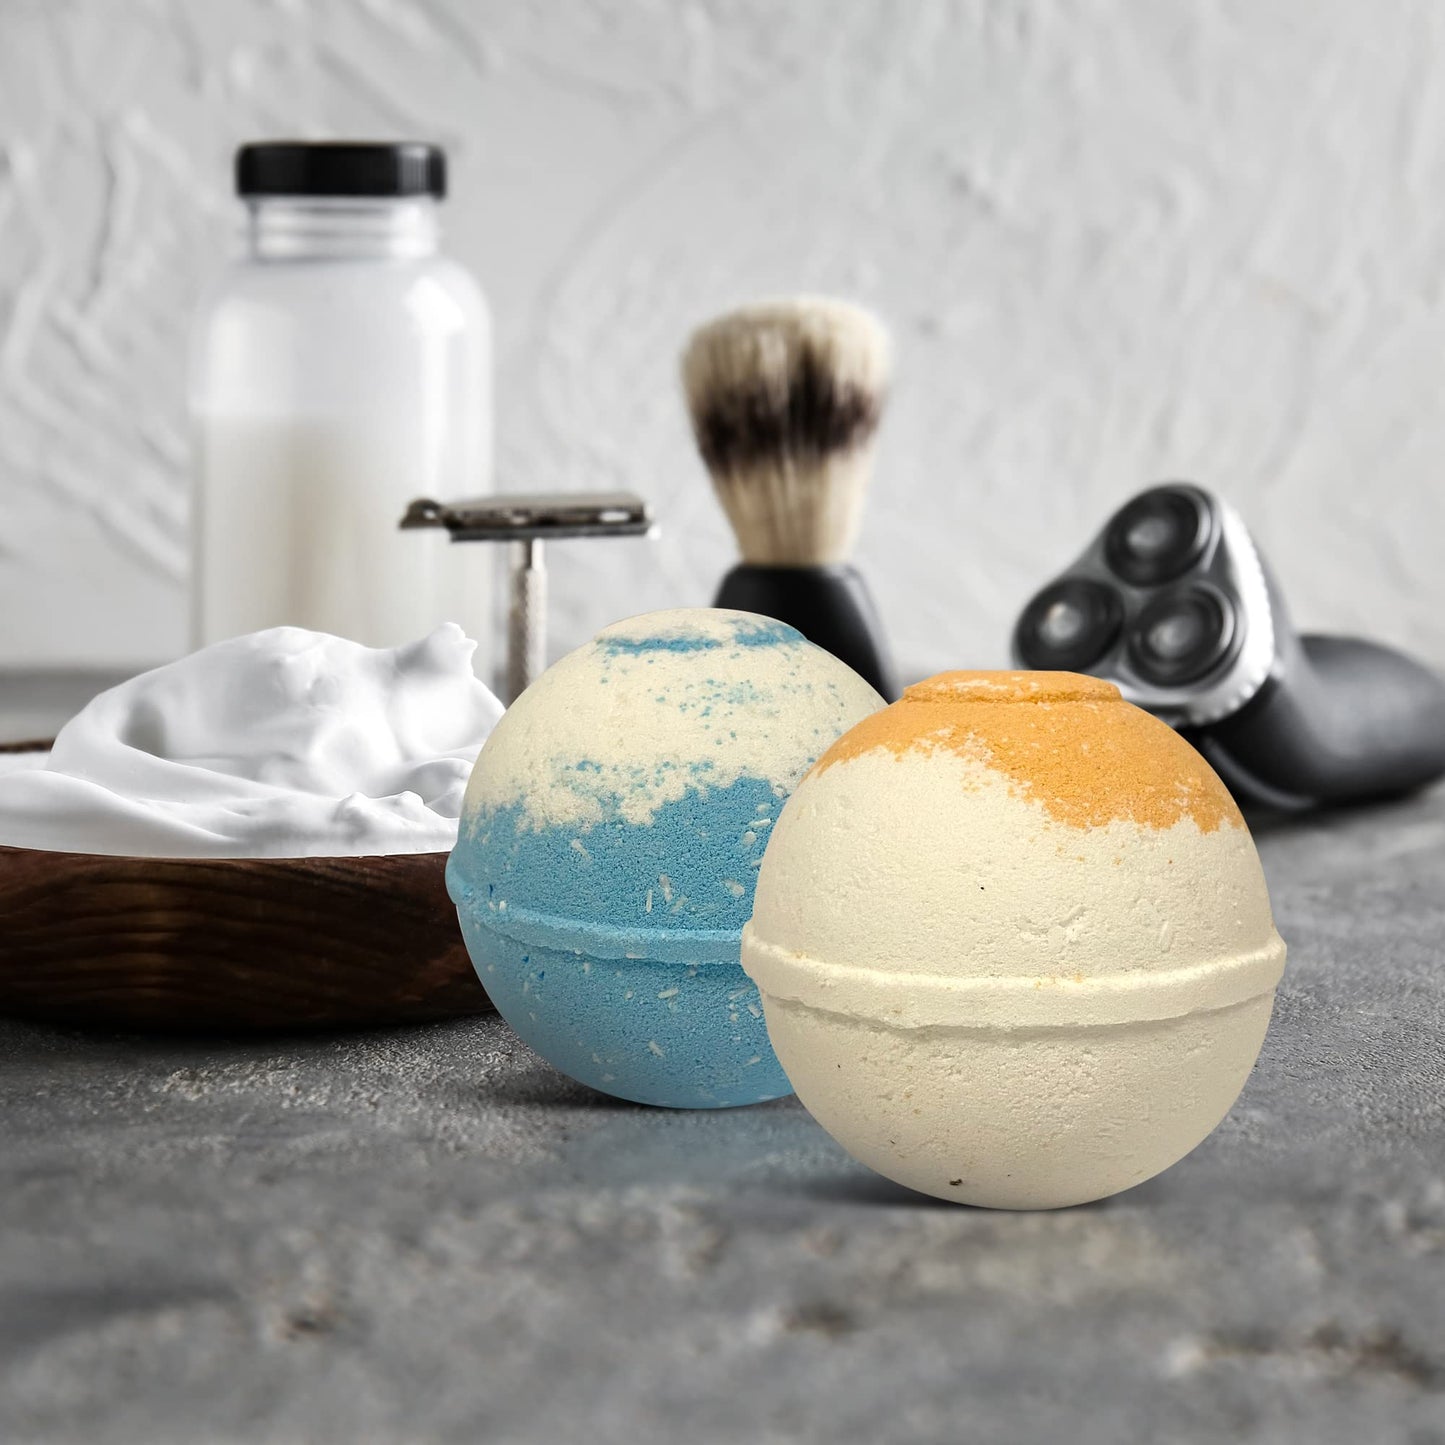 Organic Bath Bombs Gift Set for Men - Vegan Natural Ingredients - Absolutely Safe for Men - Relaxing Epsom, Himalayan, Dead Sea Salts & Essential Oils - Made in The USA